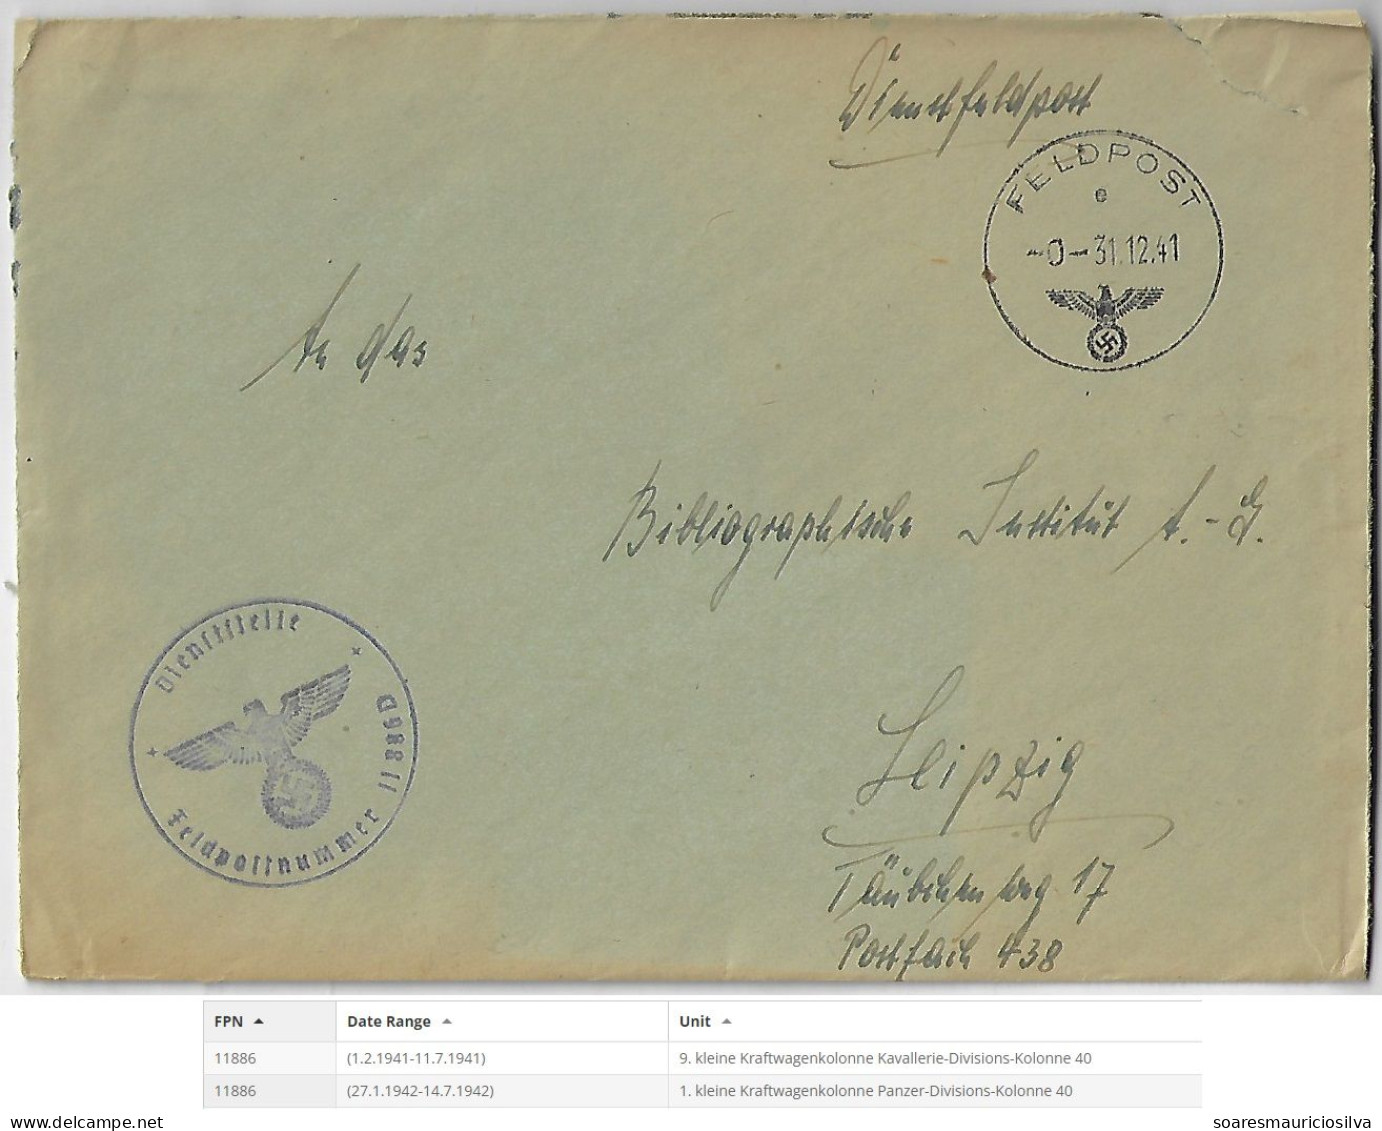 Germany 1941 Feldpost Cover Cancel Eagle Swastika Number 11886 1st Small Motor Vehicle Column Panzer Division Column 40 - Feldpost 2a Guerra Mondiale